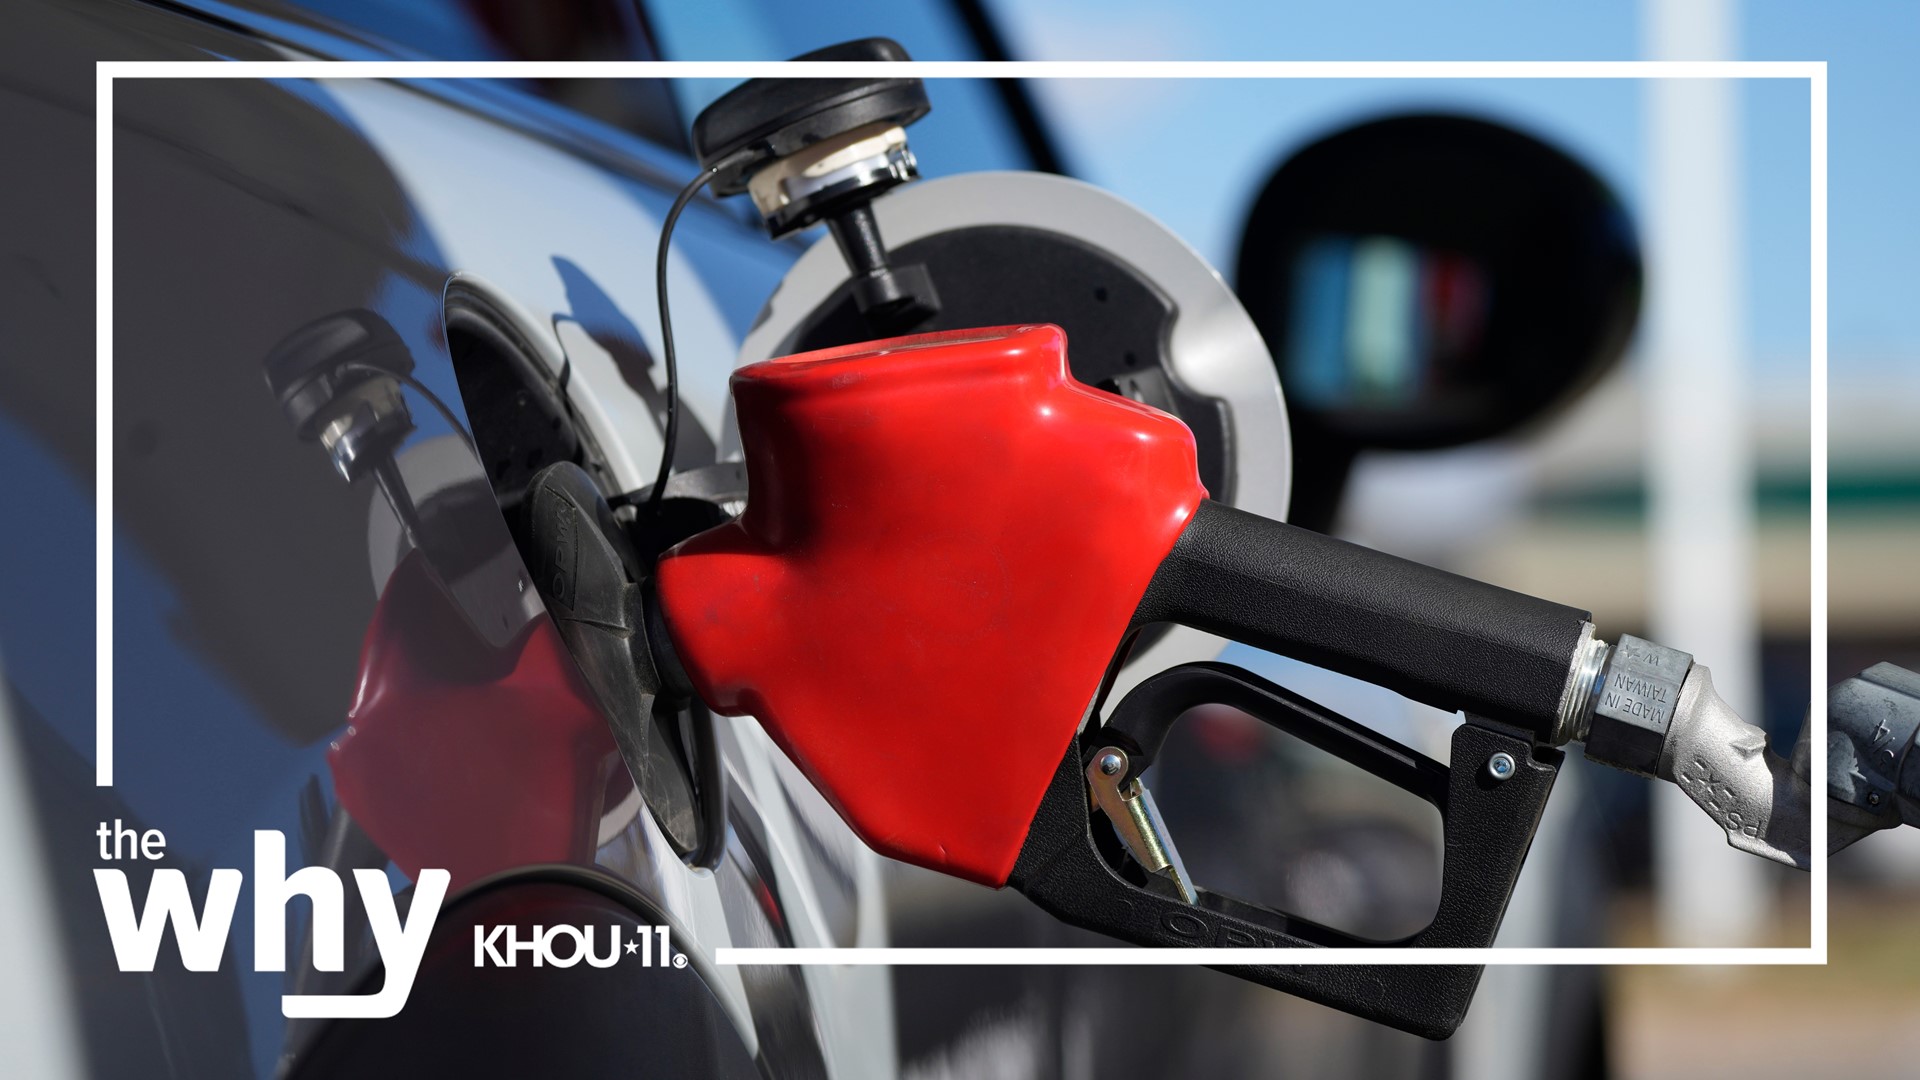 A switch to summer blend gasoline usually drives fuel costs up.